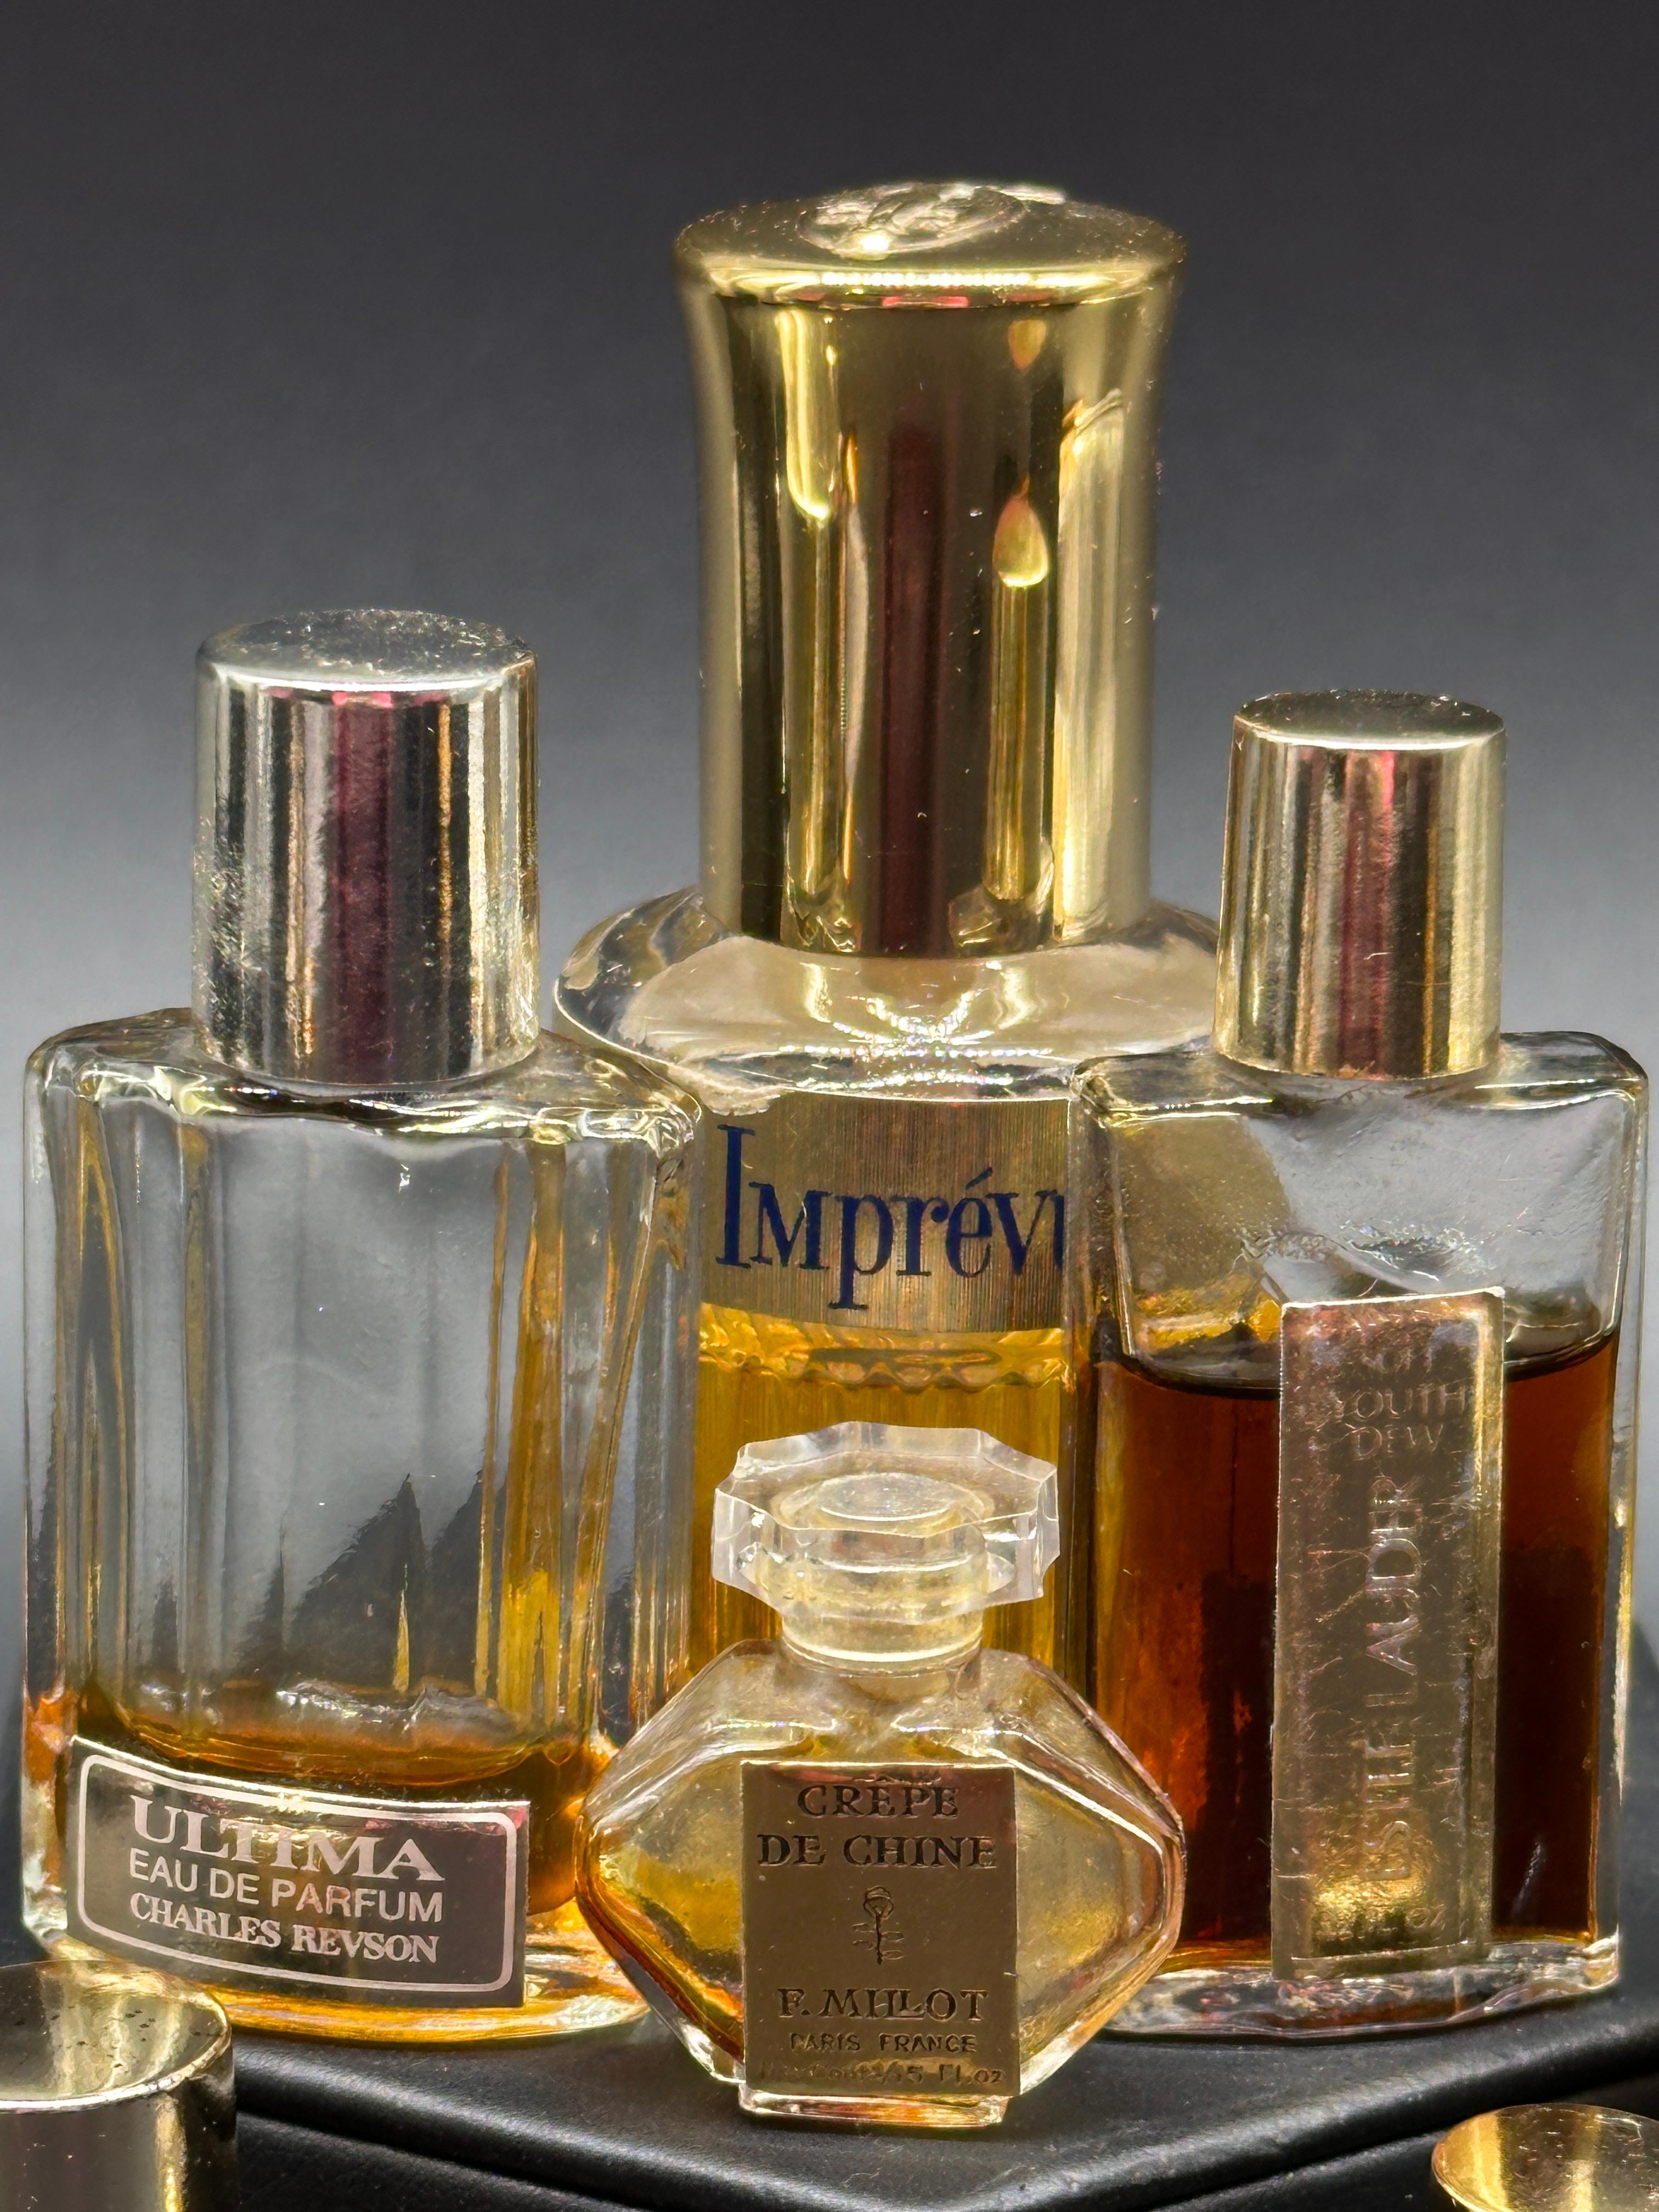 Assortment of Vintage Perfume and Cologne Bottles